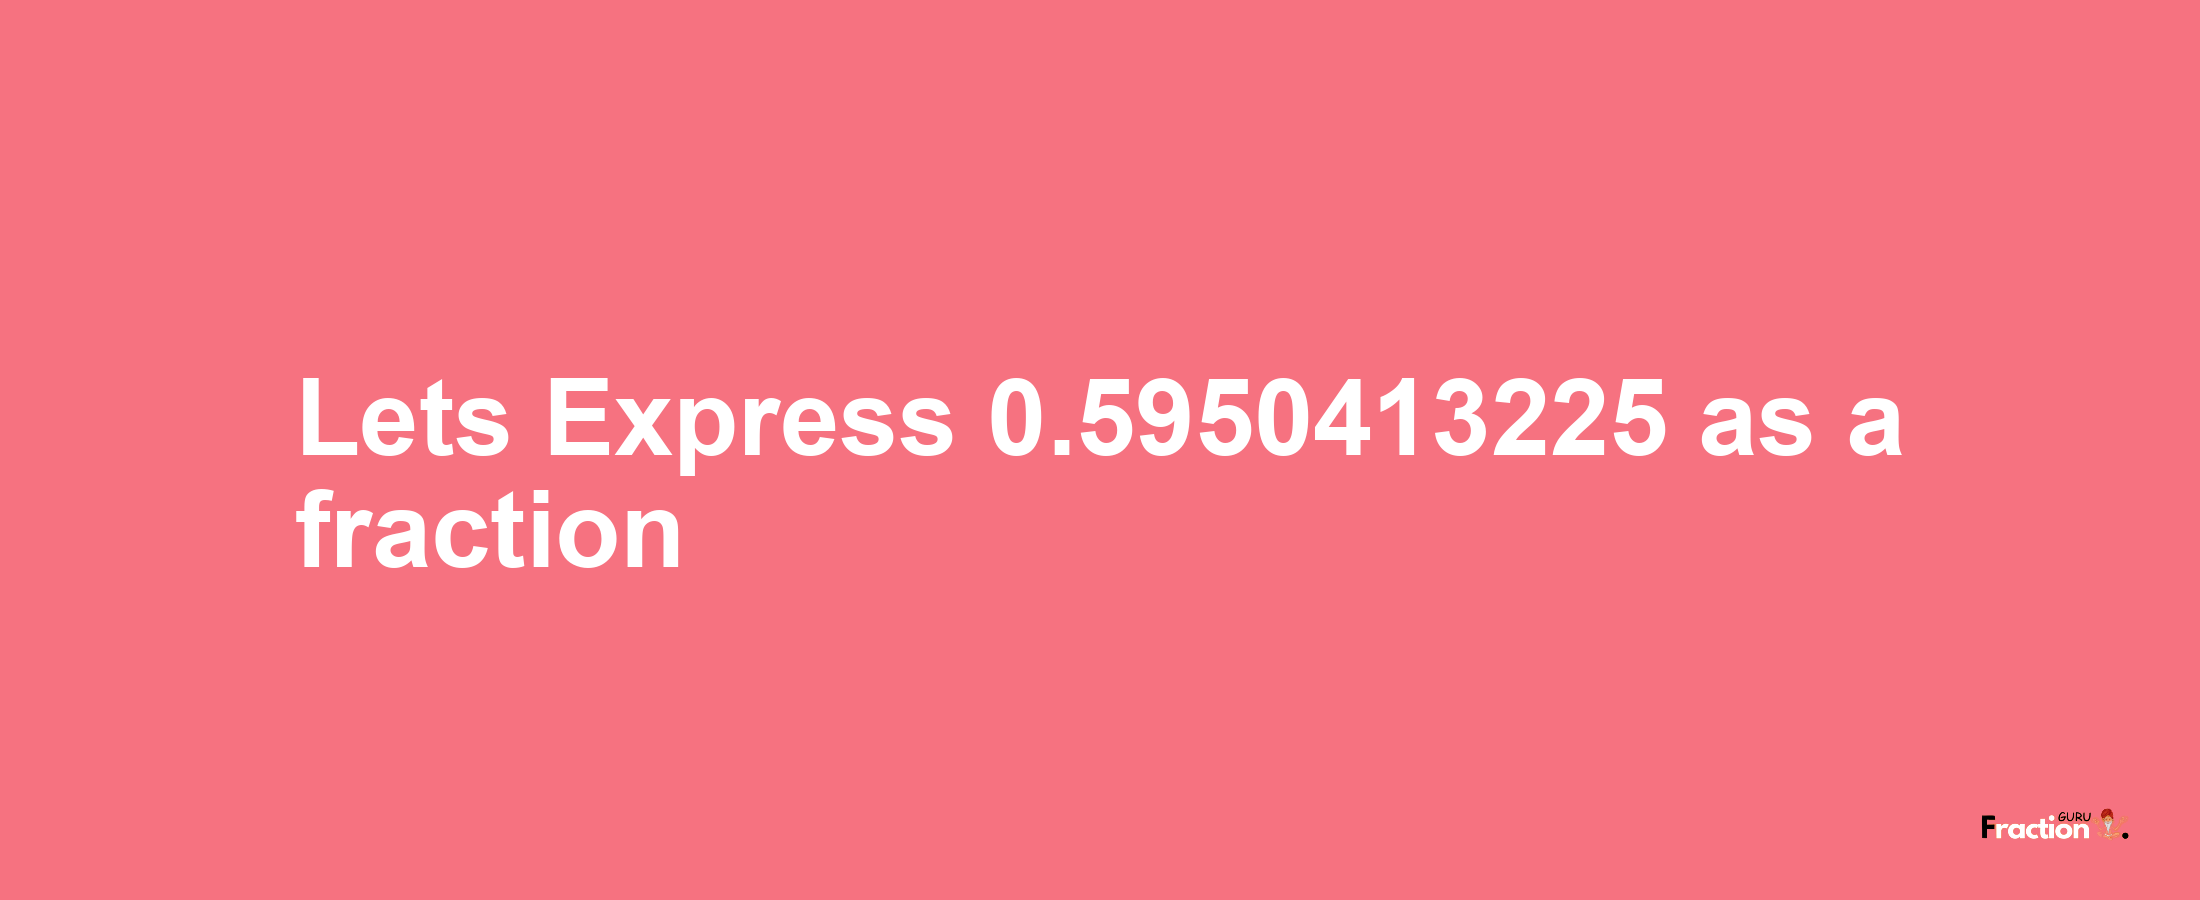 Lets Express 0.5950413225 as afraction